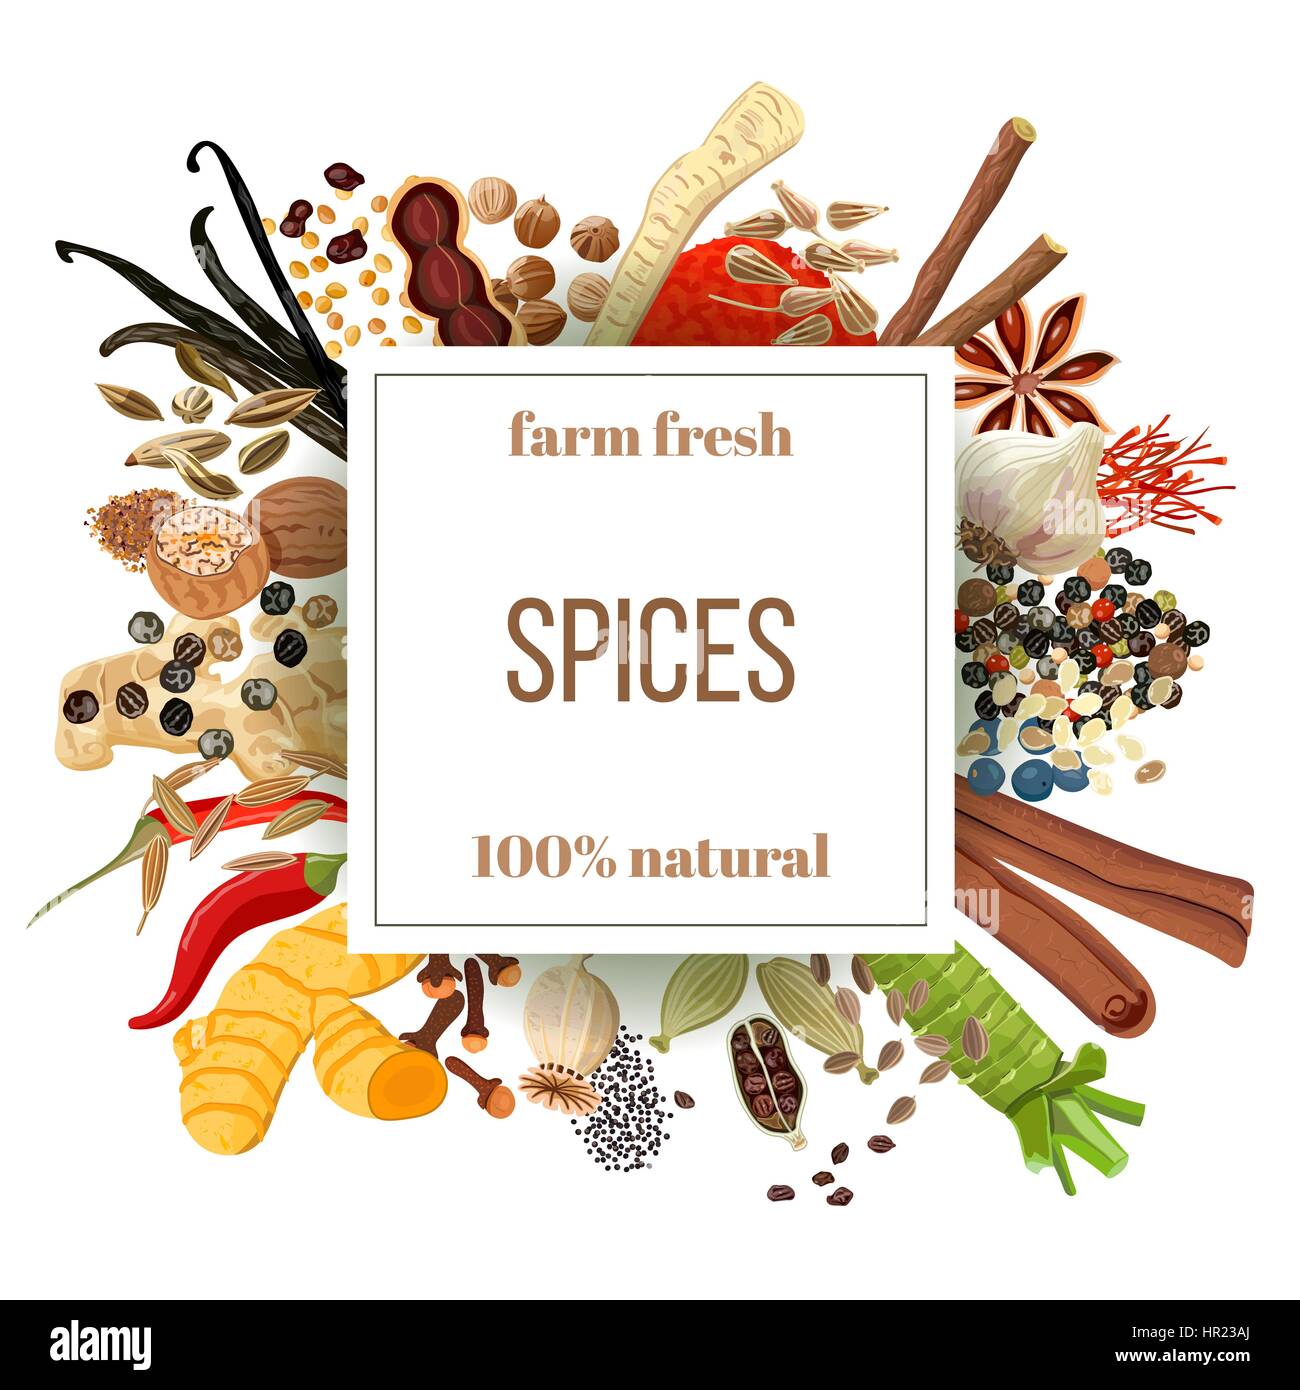 Culinary spices big set under squire emblem. Bunch of cooking seasonings. Farm fresh. For cosmetics, restaurant, store, natural health care products.  Stock Vector